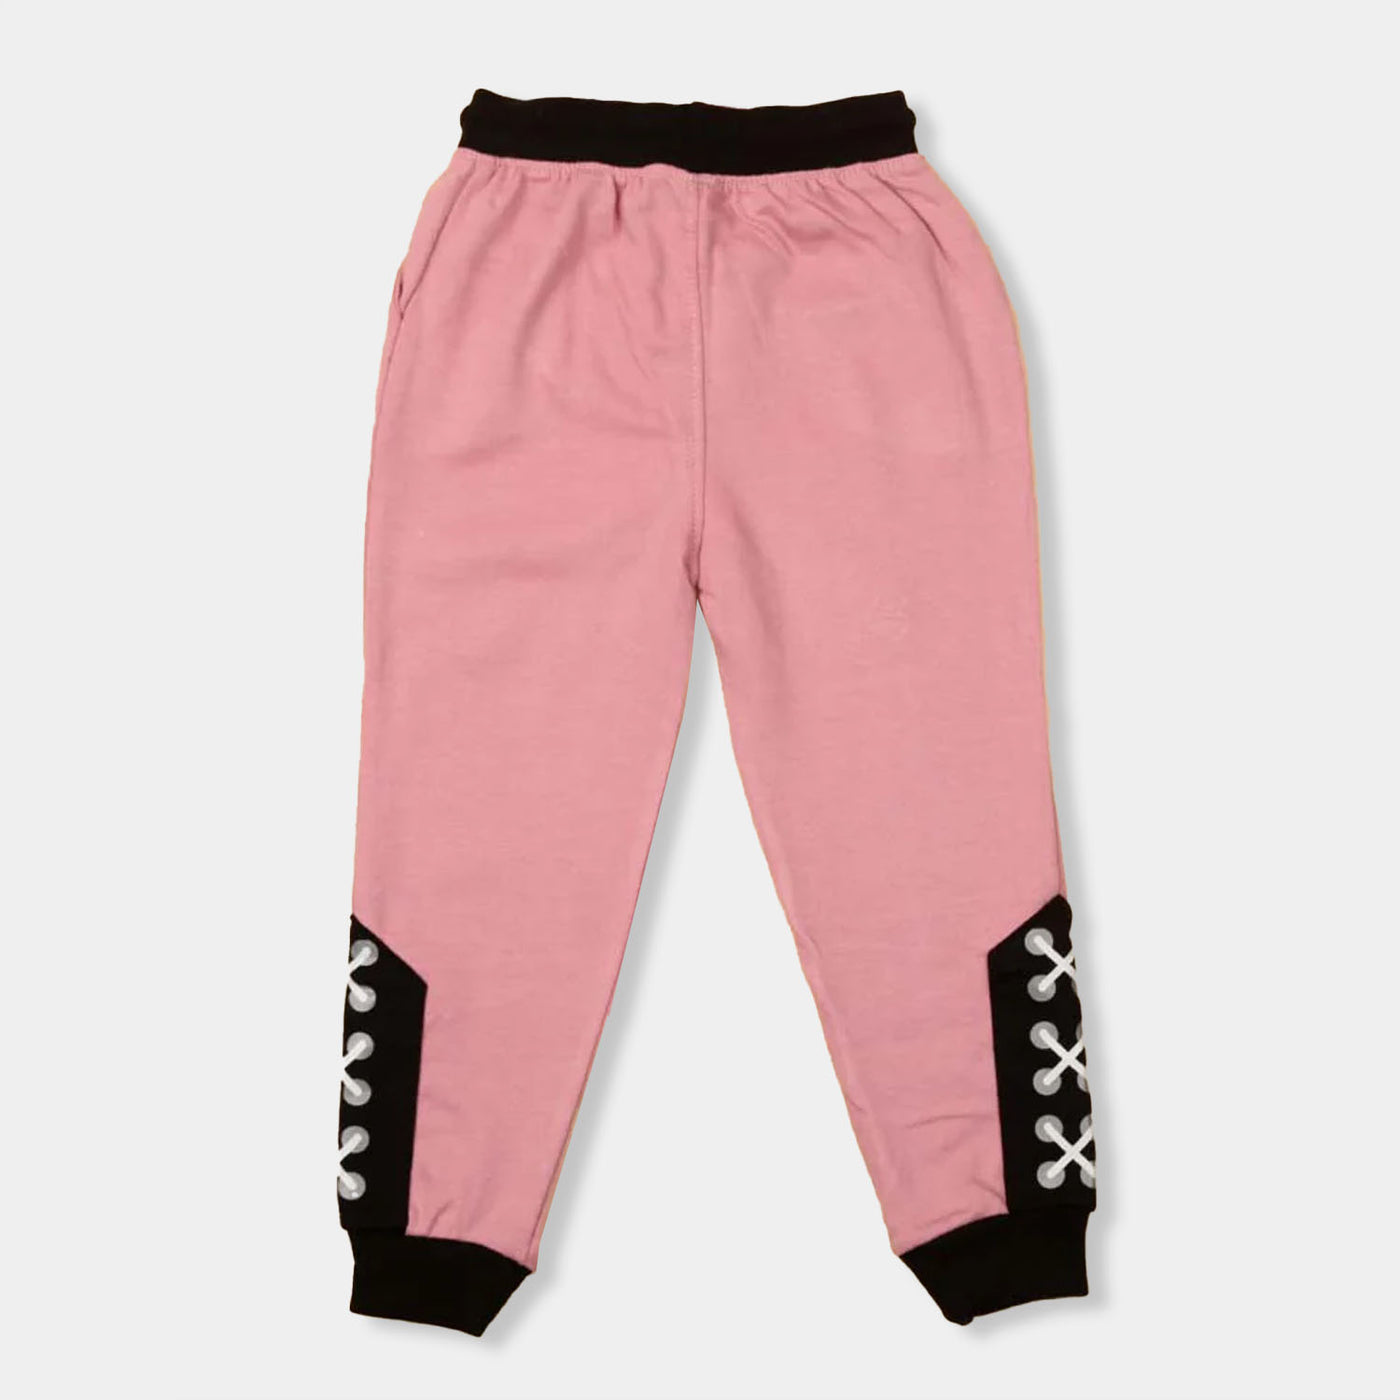 Go Girls Terry Pajama For Girls - Pink